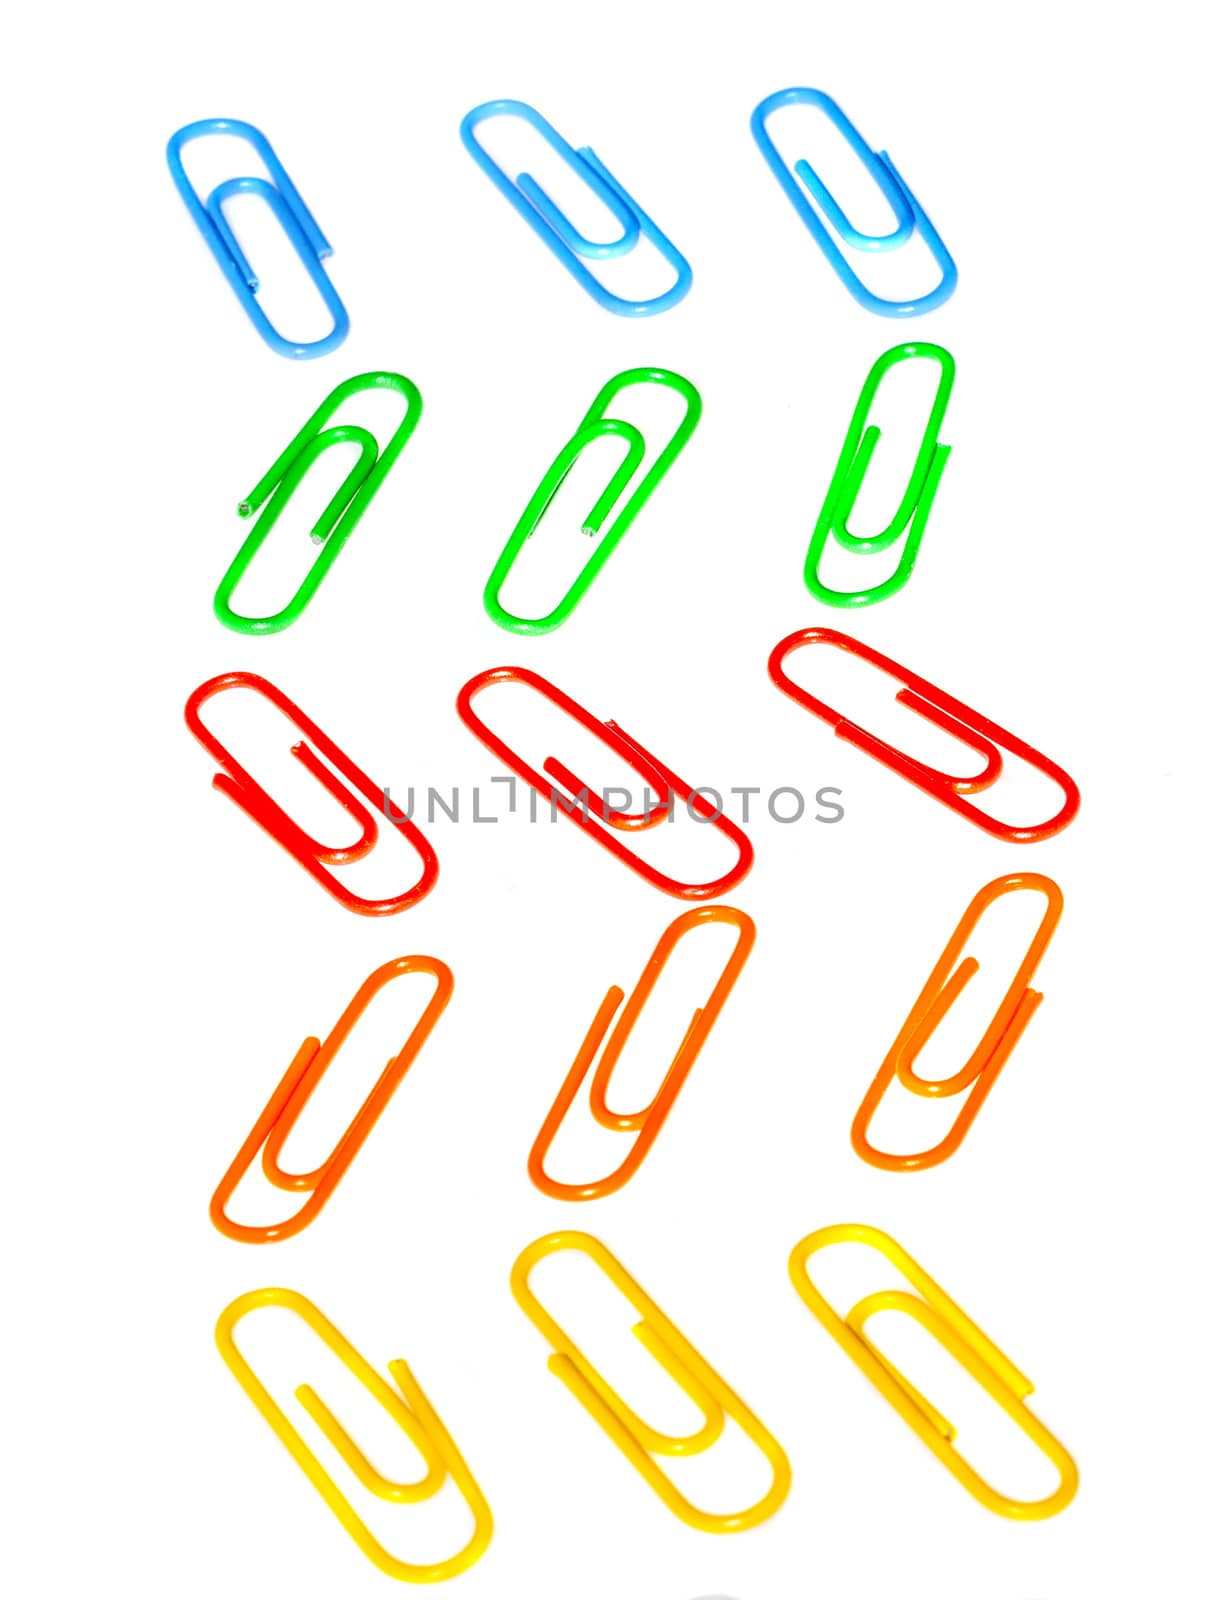 Color photo paperclips by EdVal